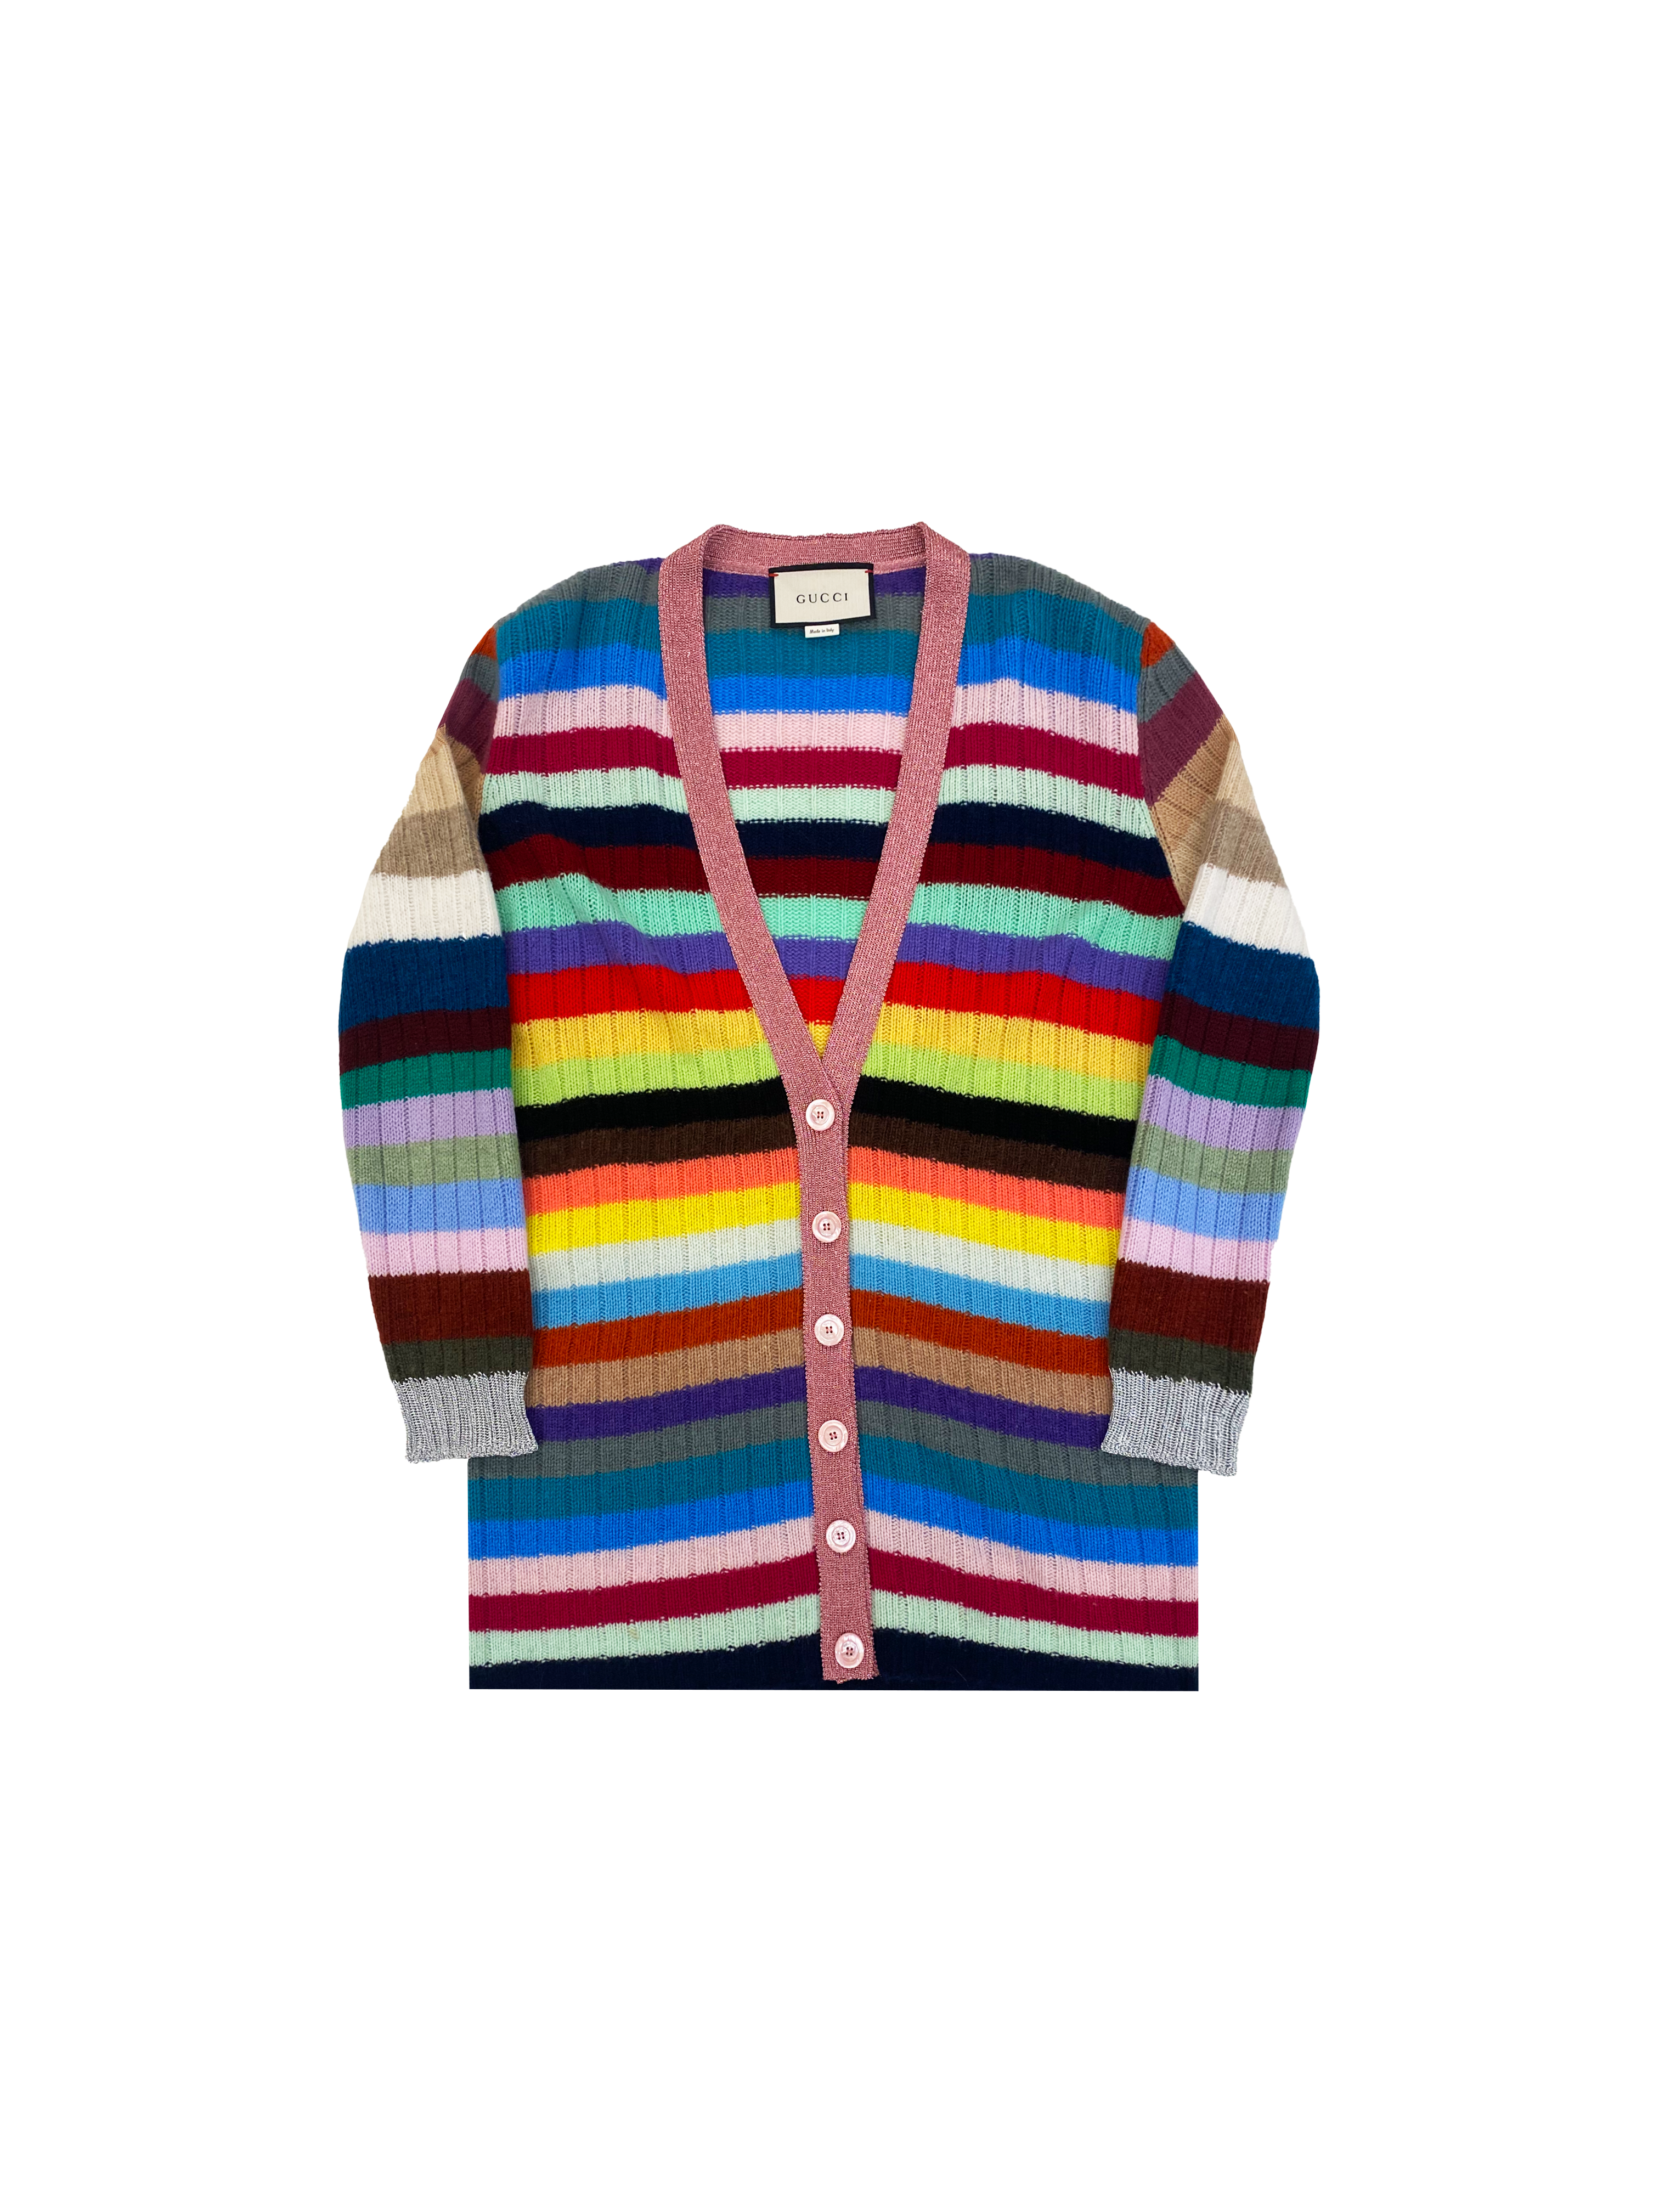 Gucci 2017 Cashmere and Wool Rainbow Striped Cardigan